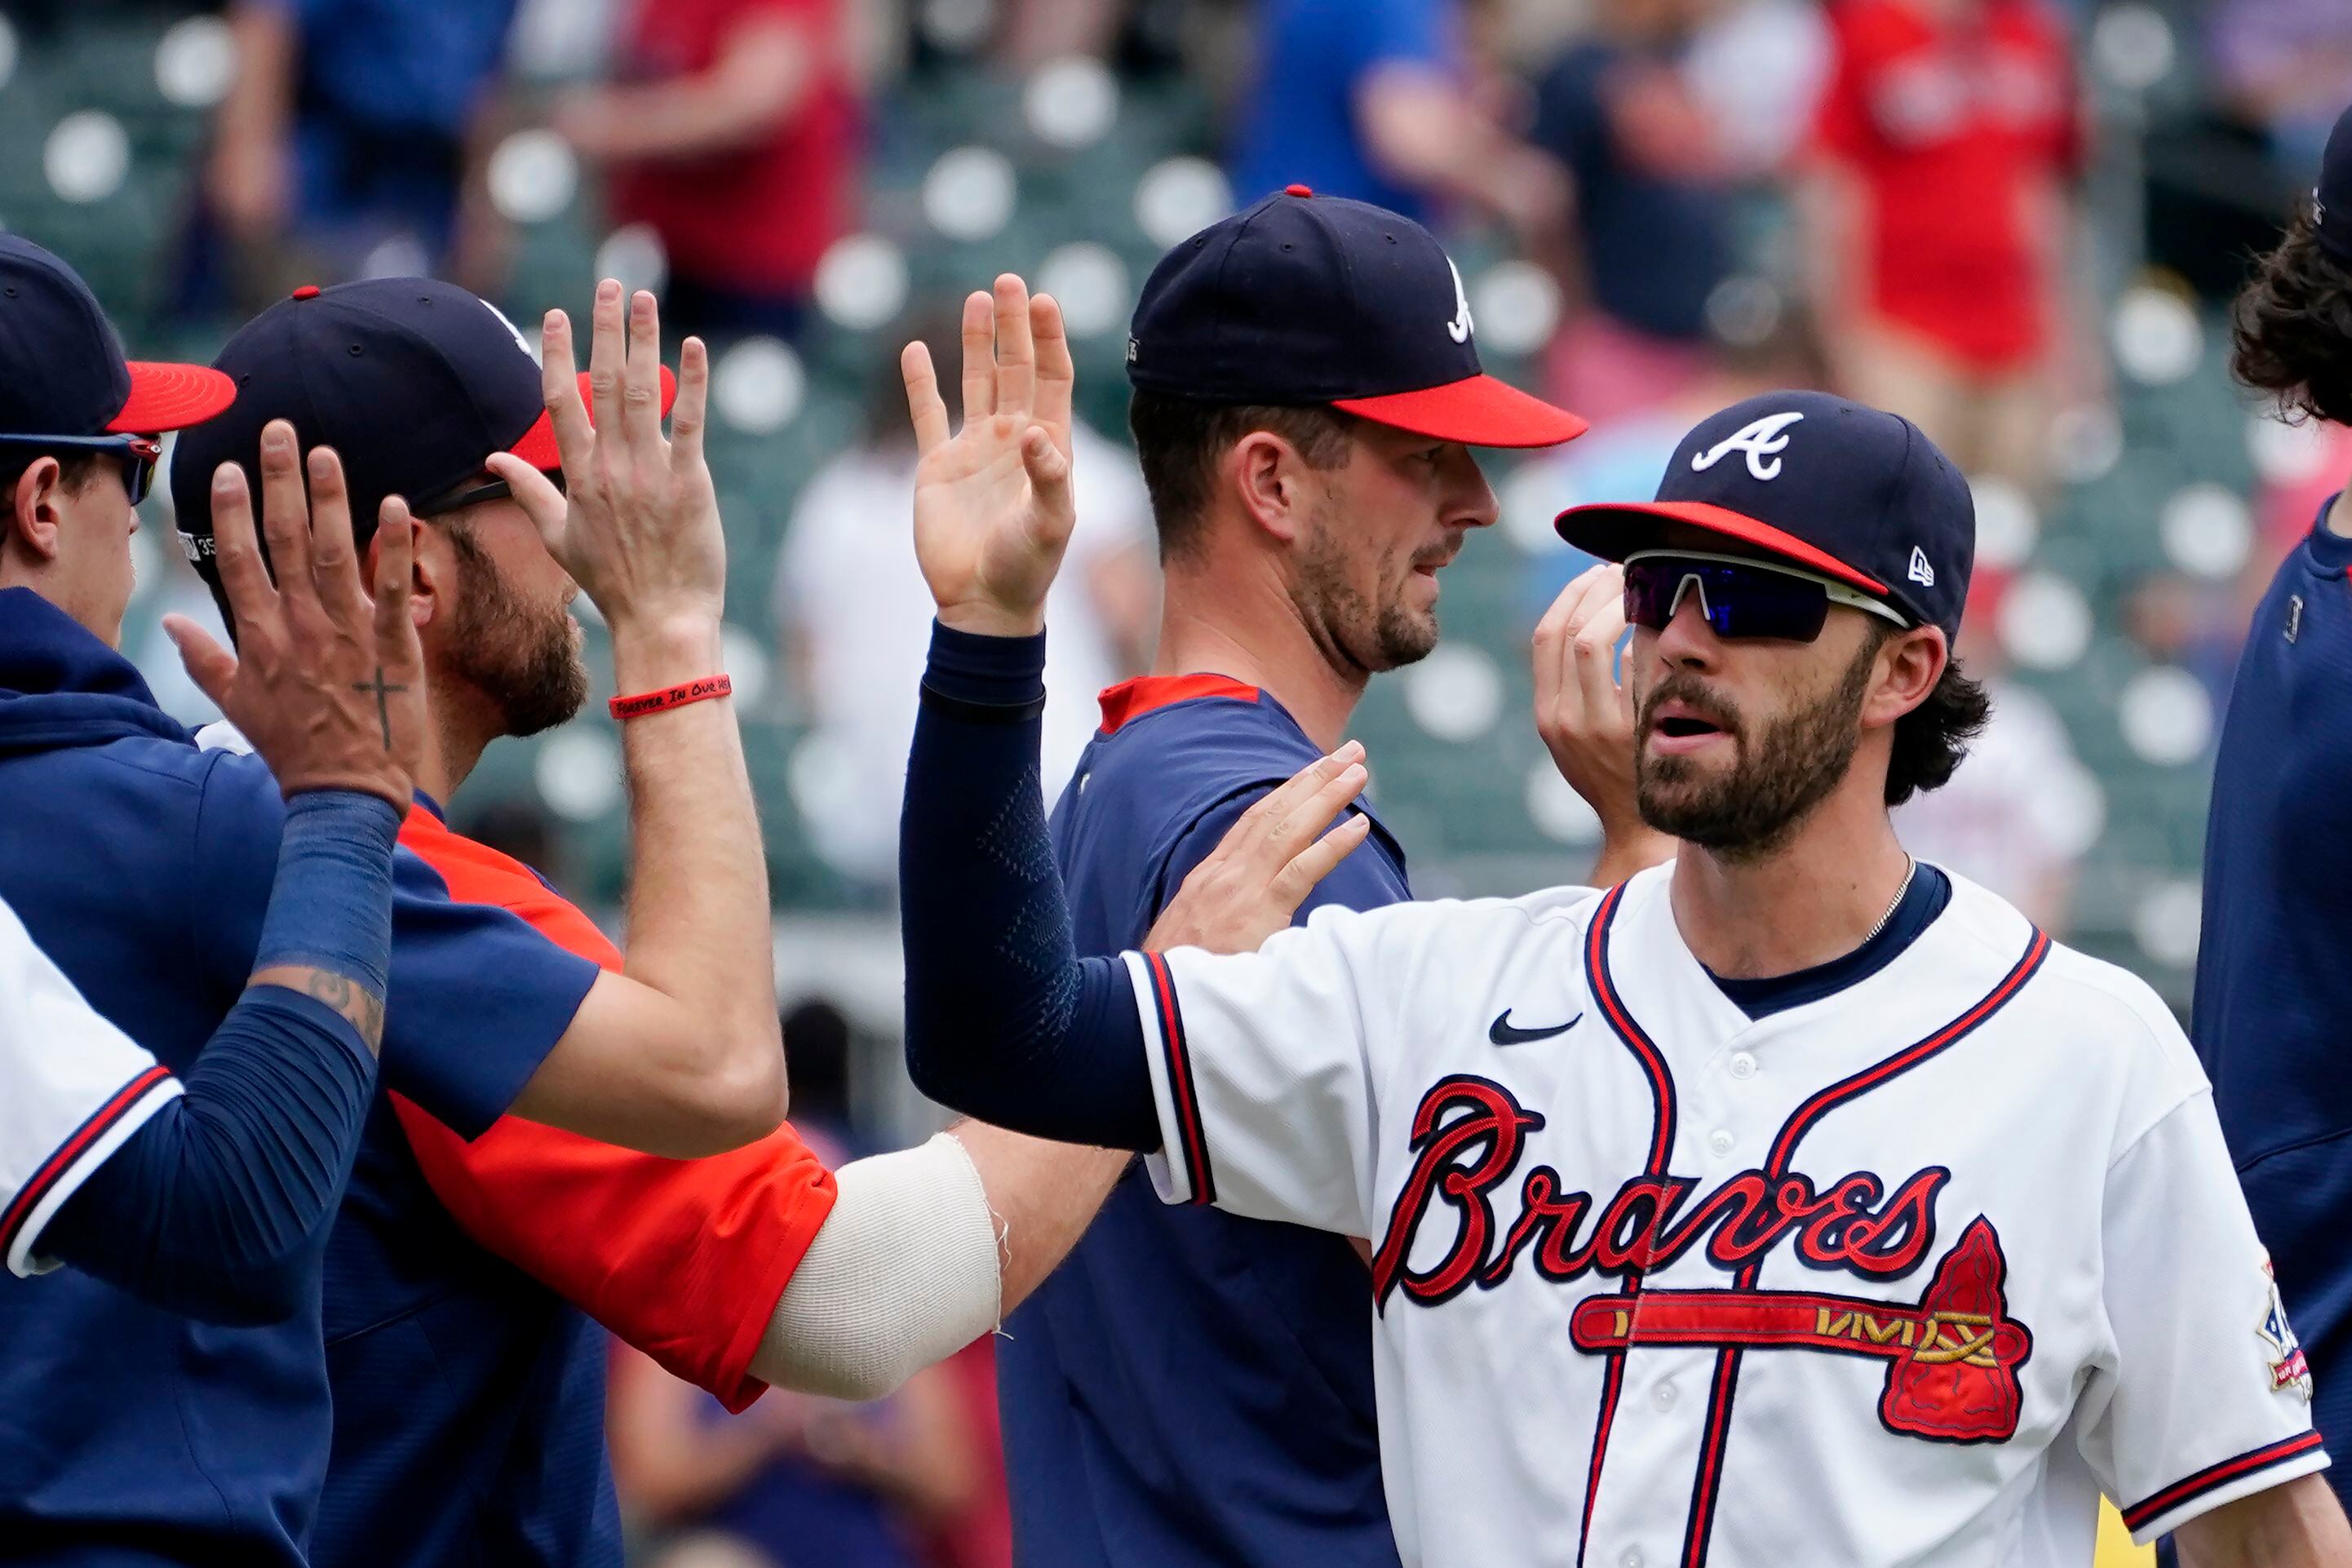 Braves are one of MLB's best teams, and Brian Snitker is their guiding force